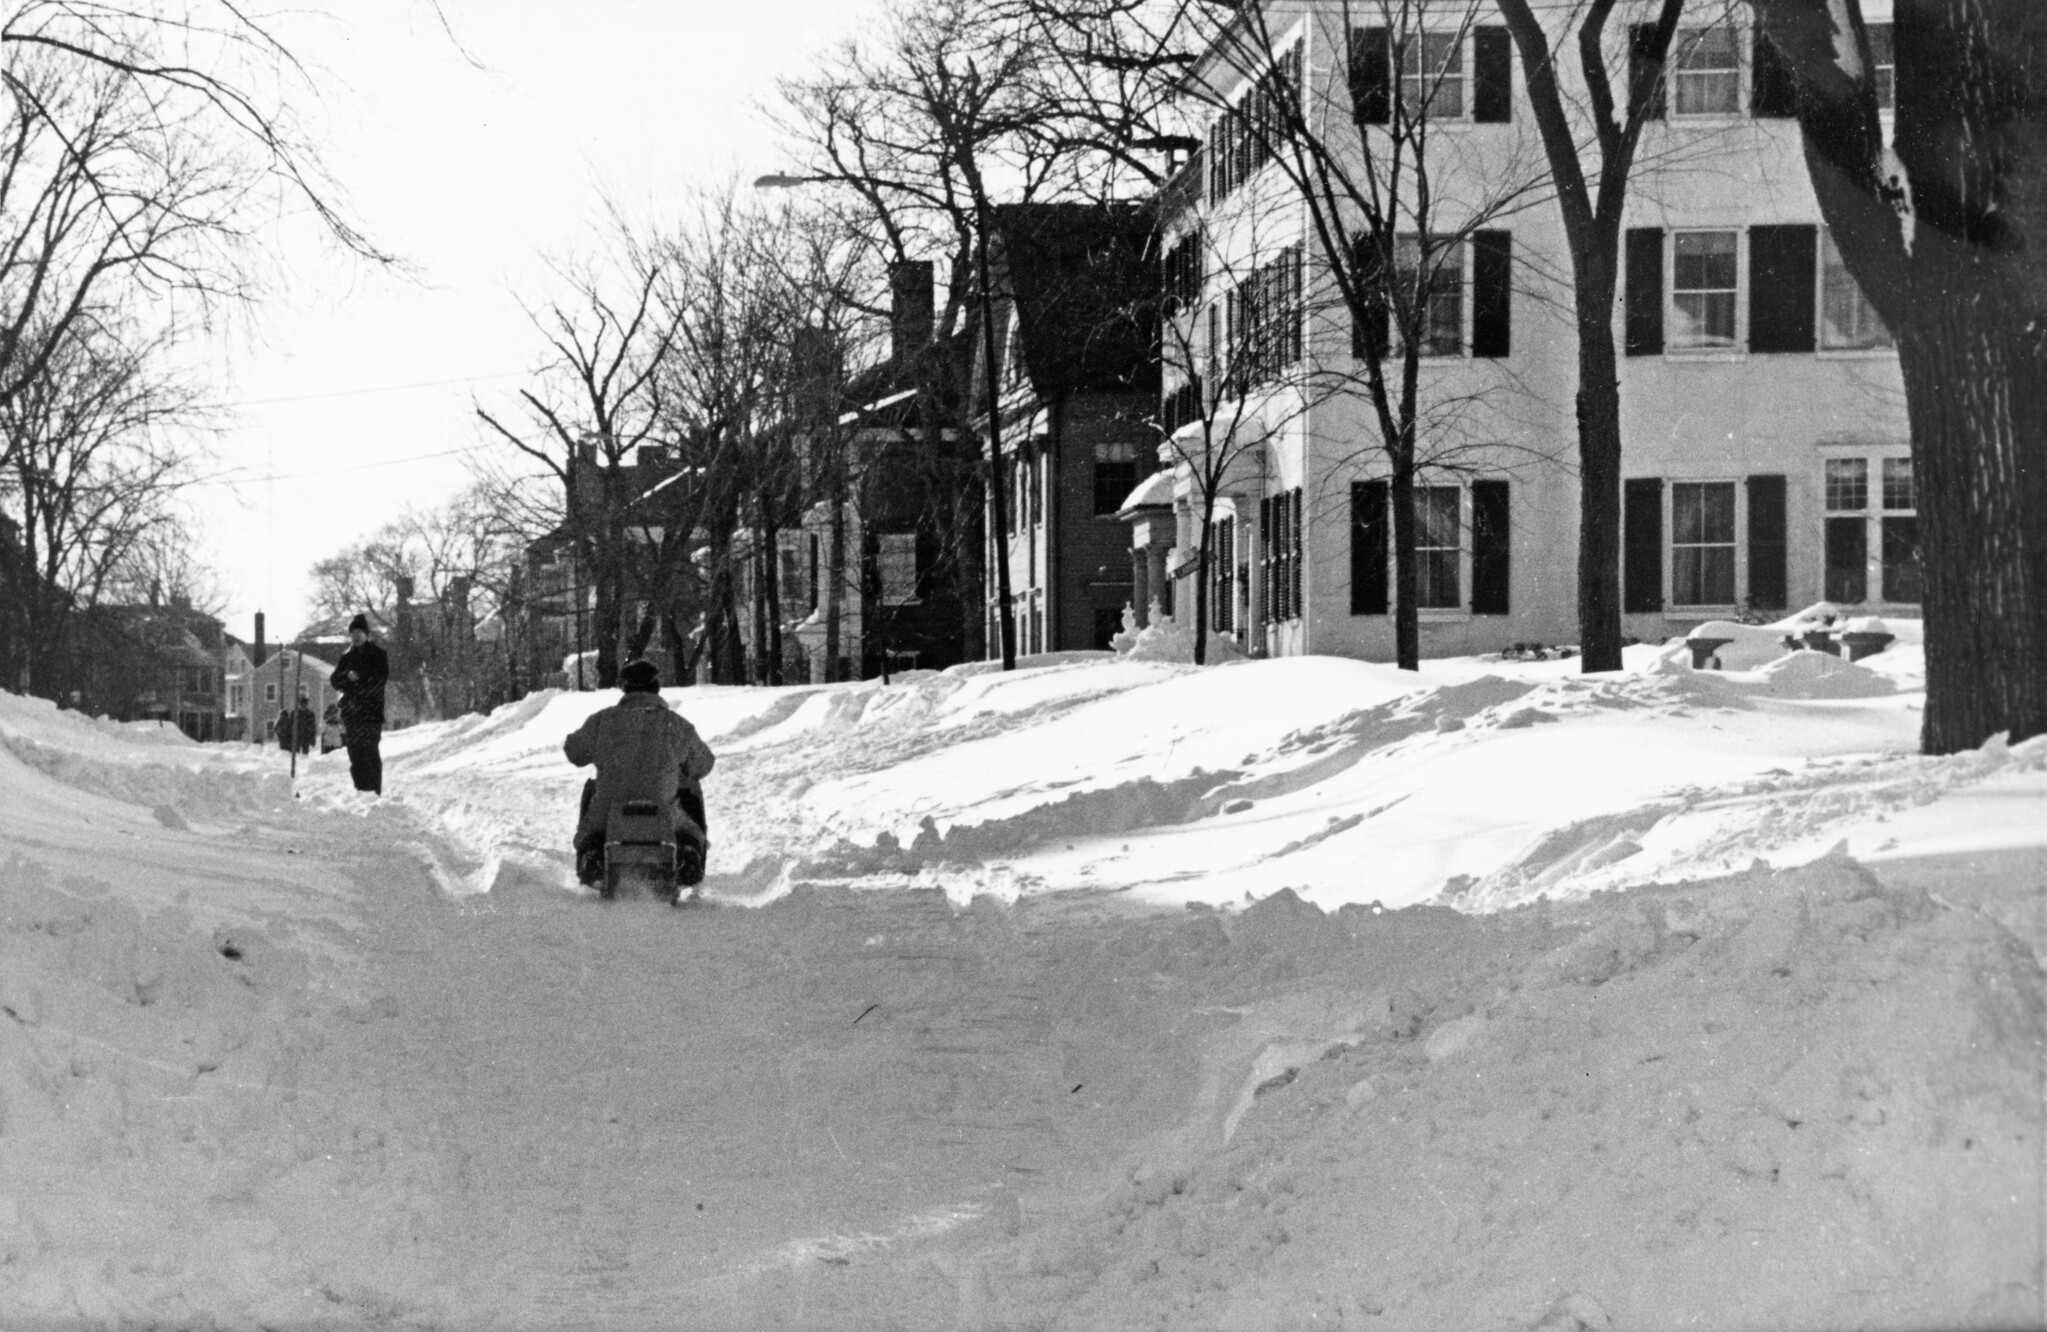 Black and white photograph of a person driving a snowmobile down a snow-covered street in Salem, Massachusetts, following a blizzard in 1993.